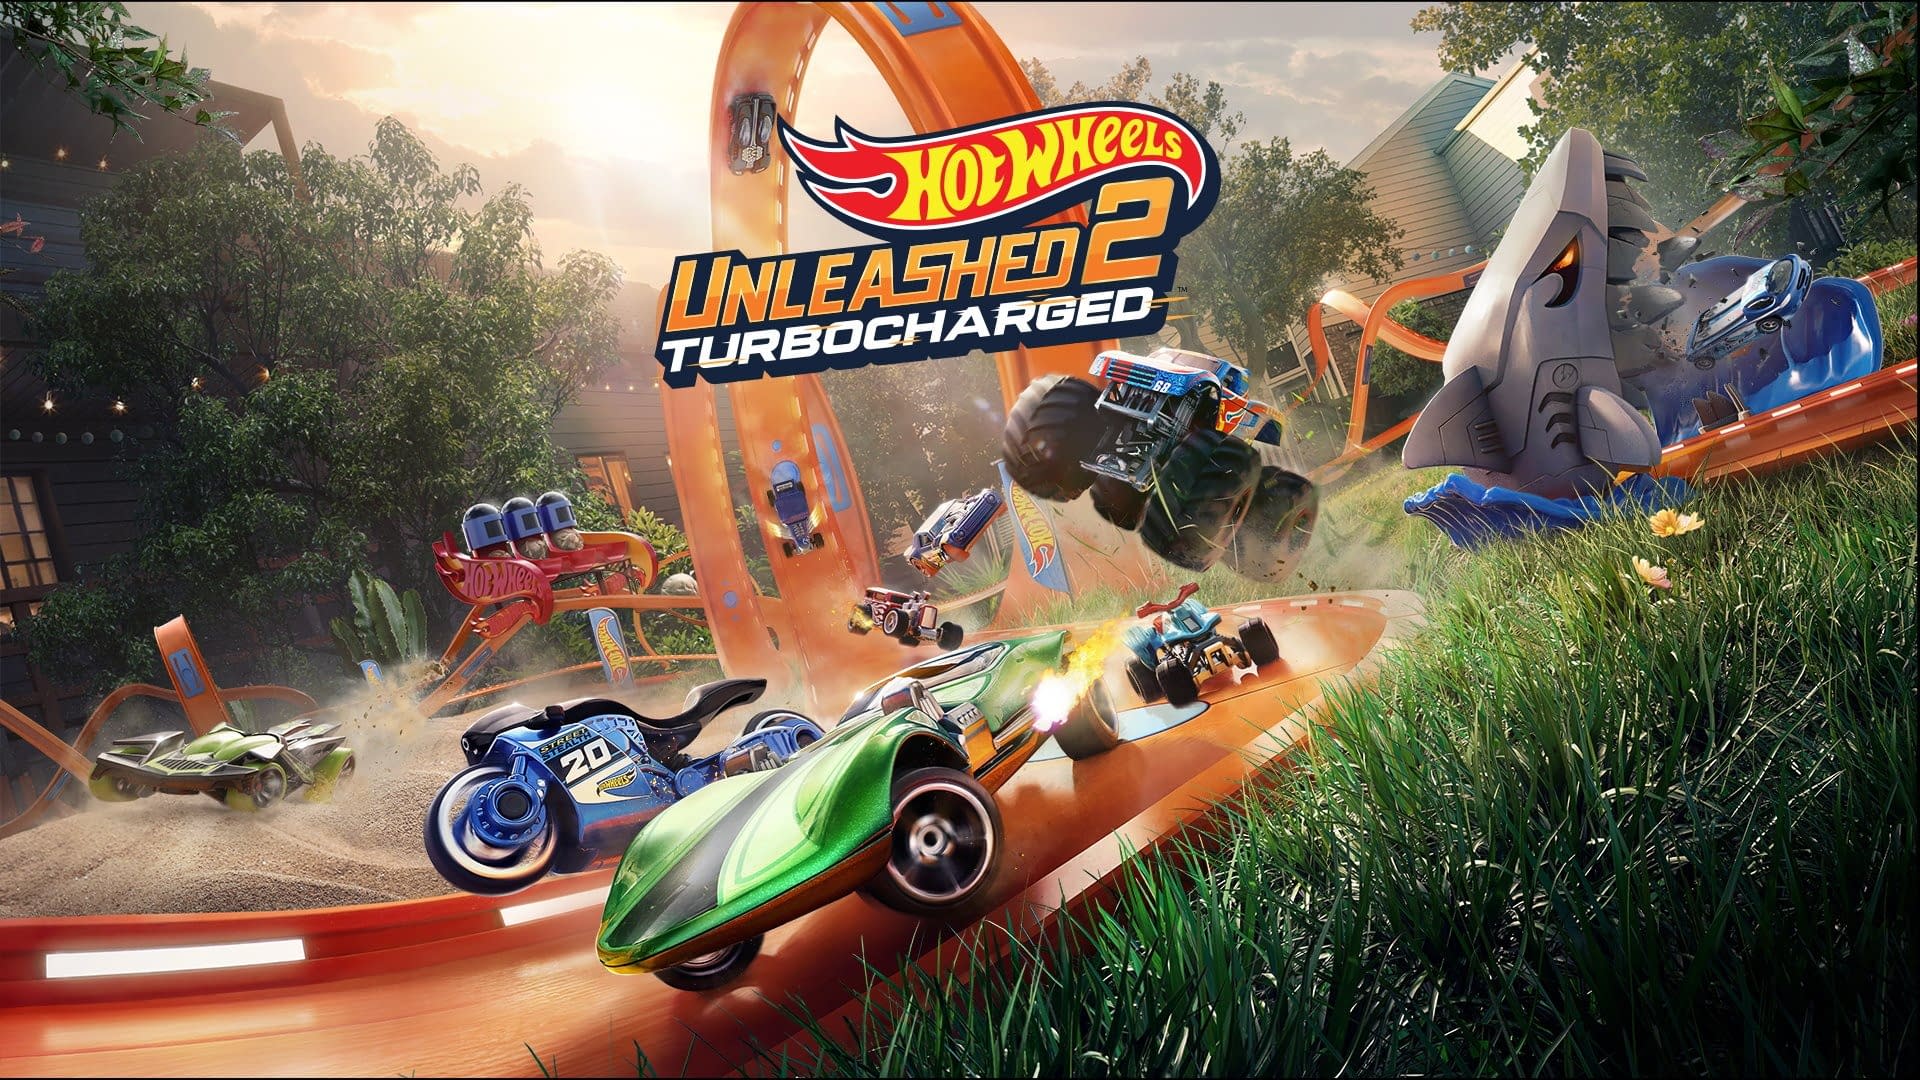 Milestone Announces New Hot Wheels Game: Release Date Announced